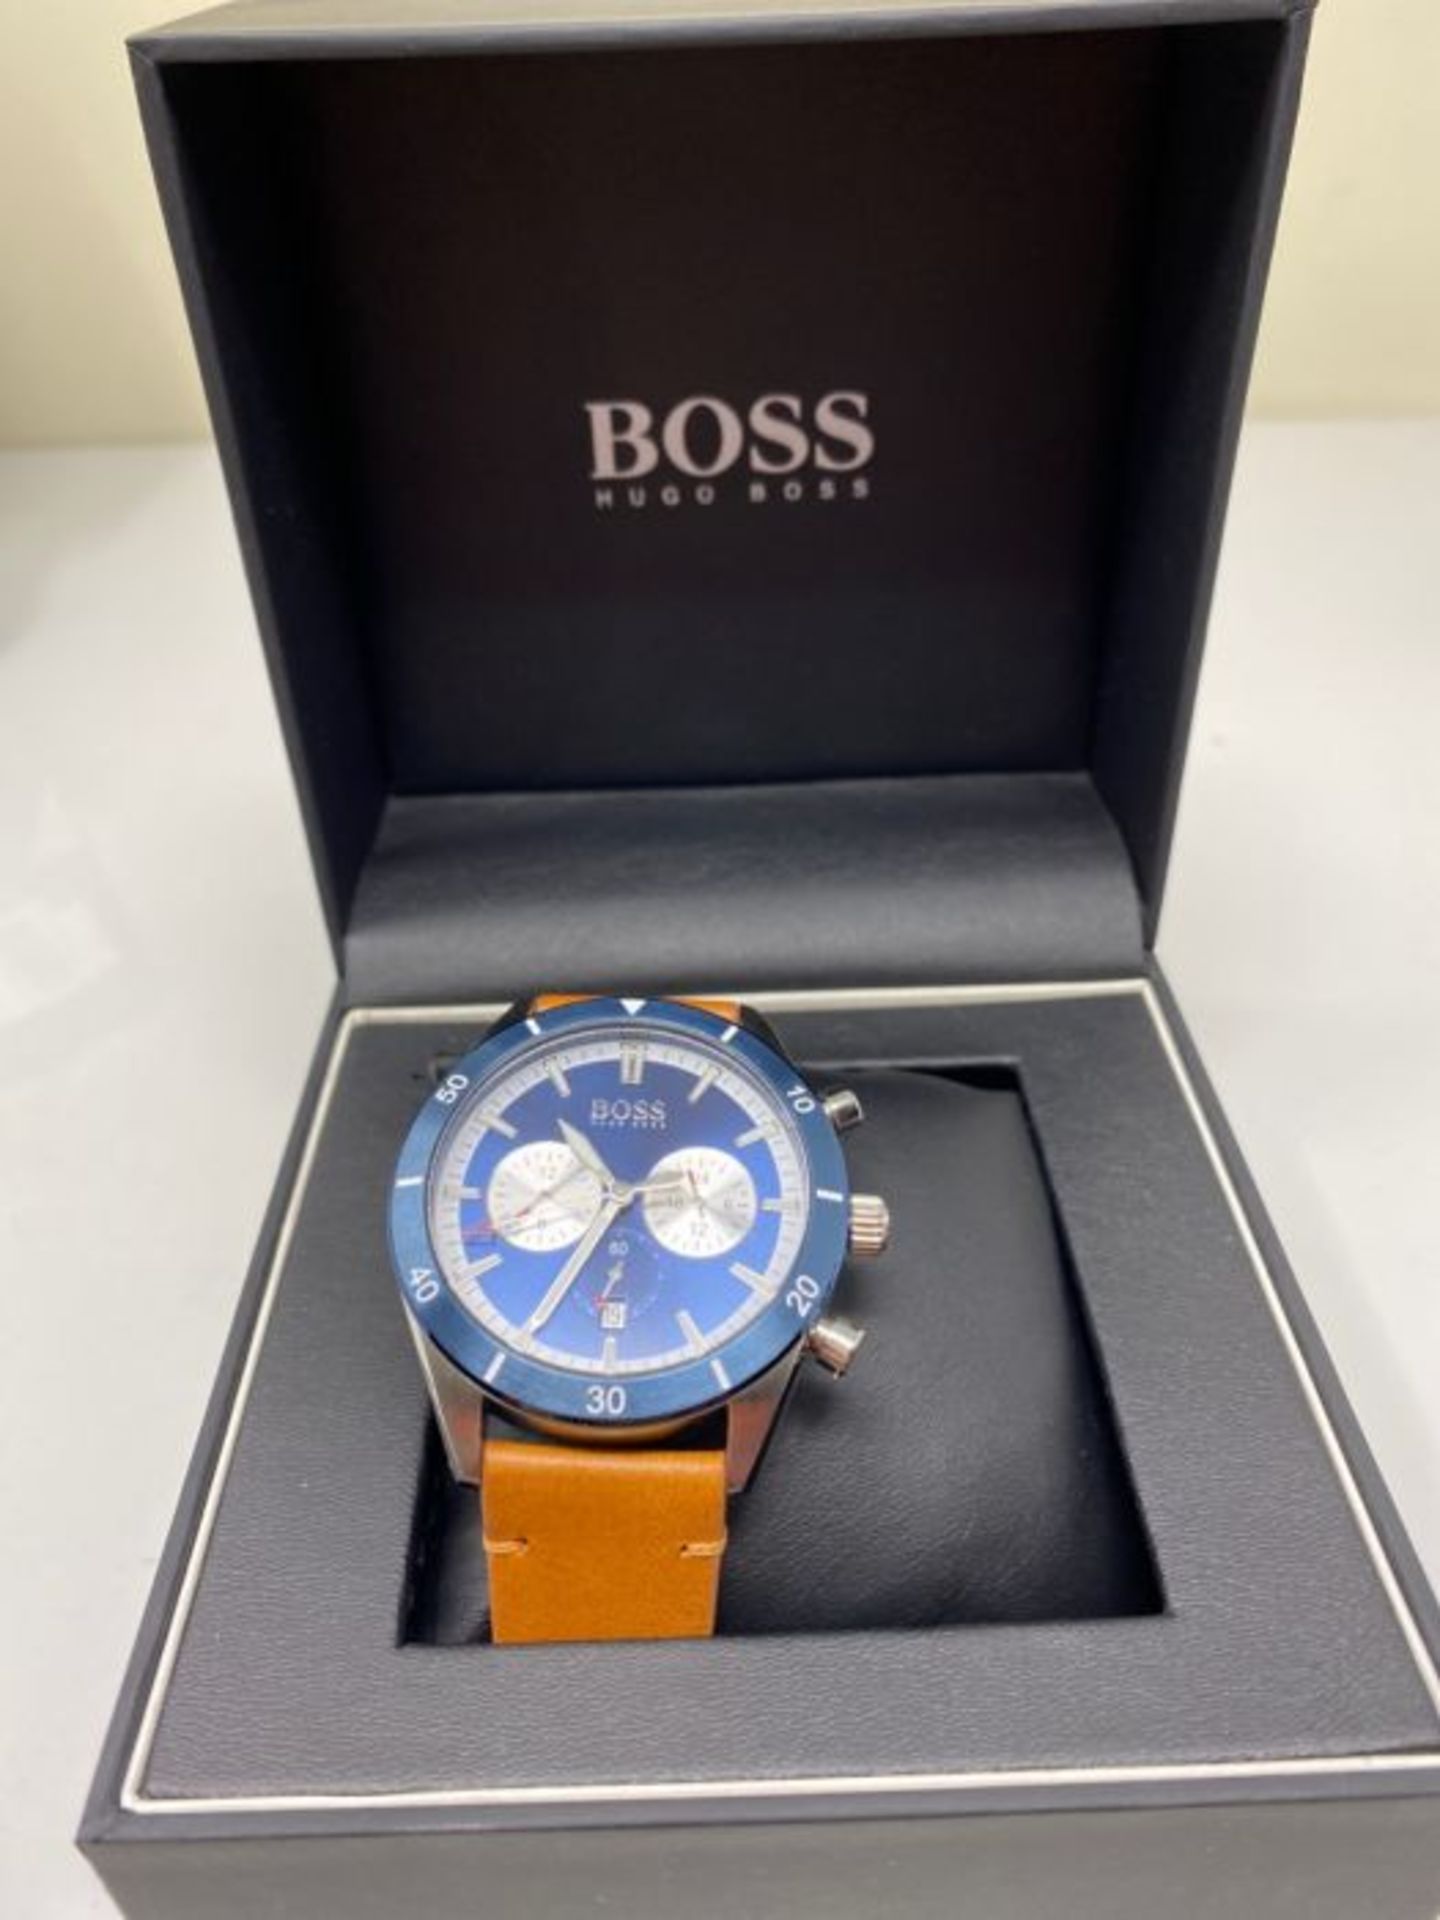 RRP £176.00 BOSS Men's Analog Quartz Watch with Leather Strap 1513860 - Image 3 of 3